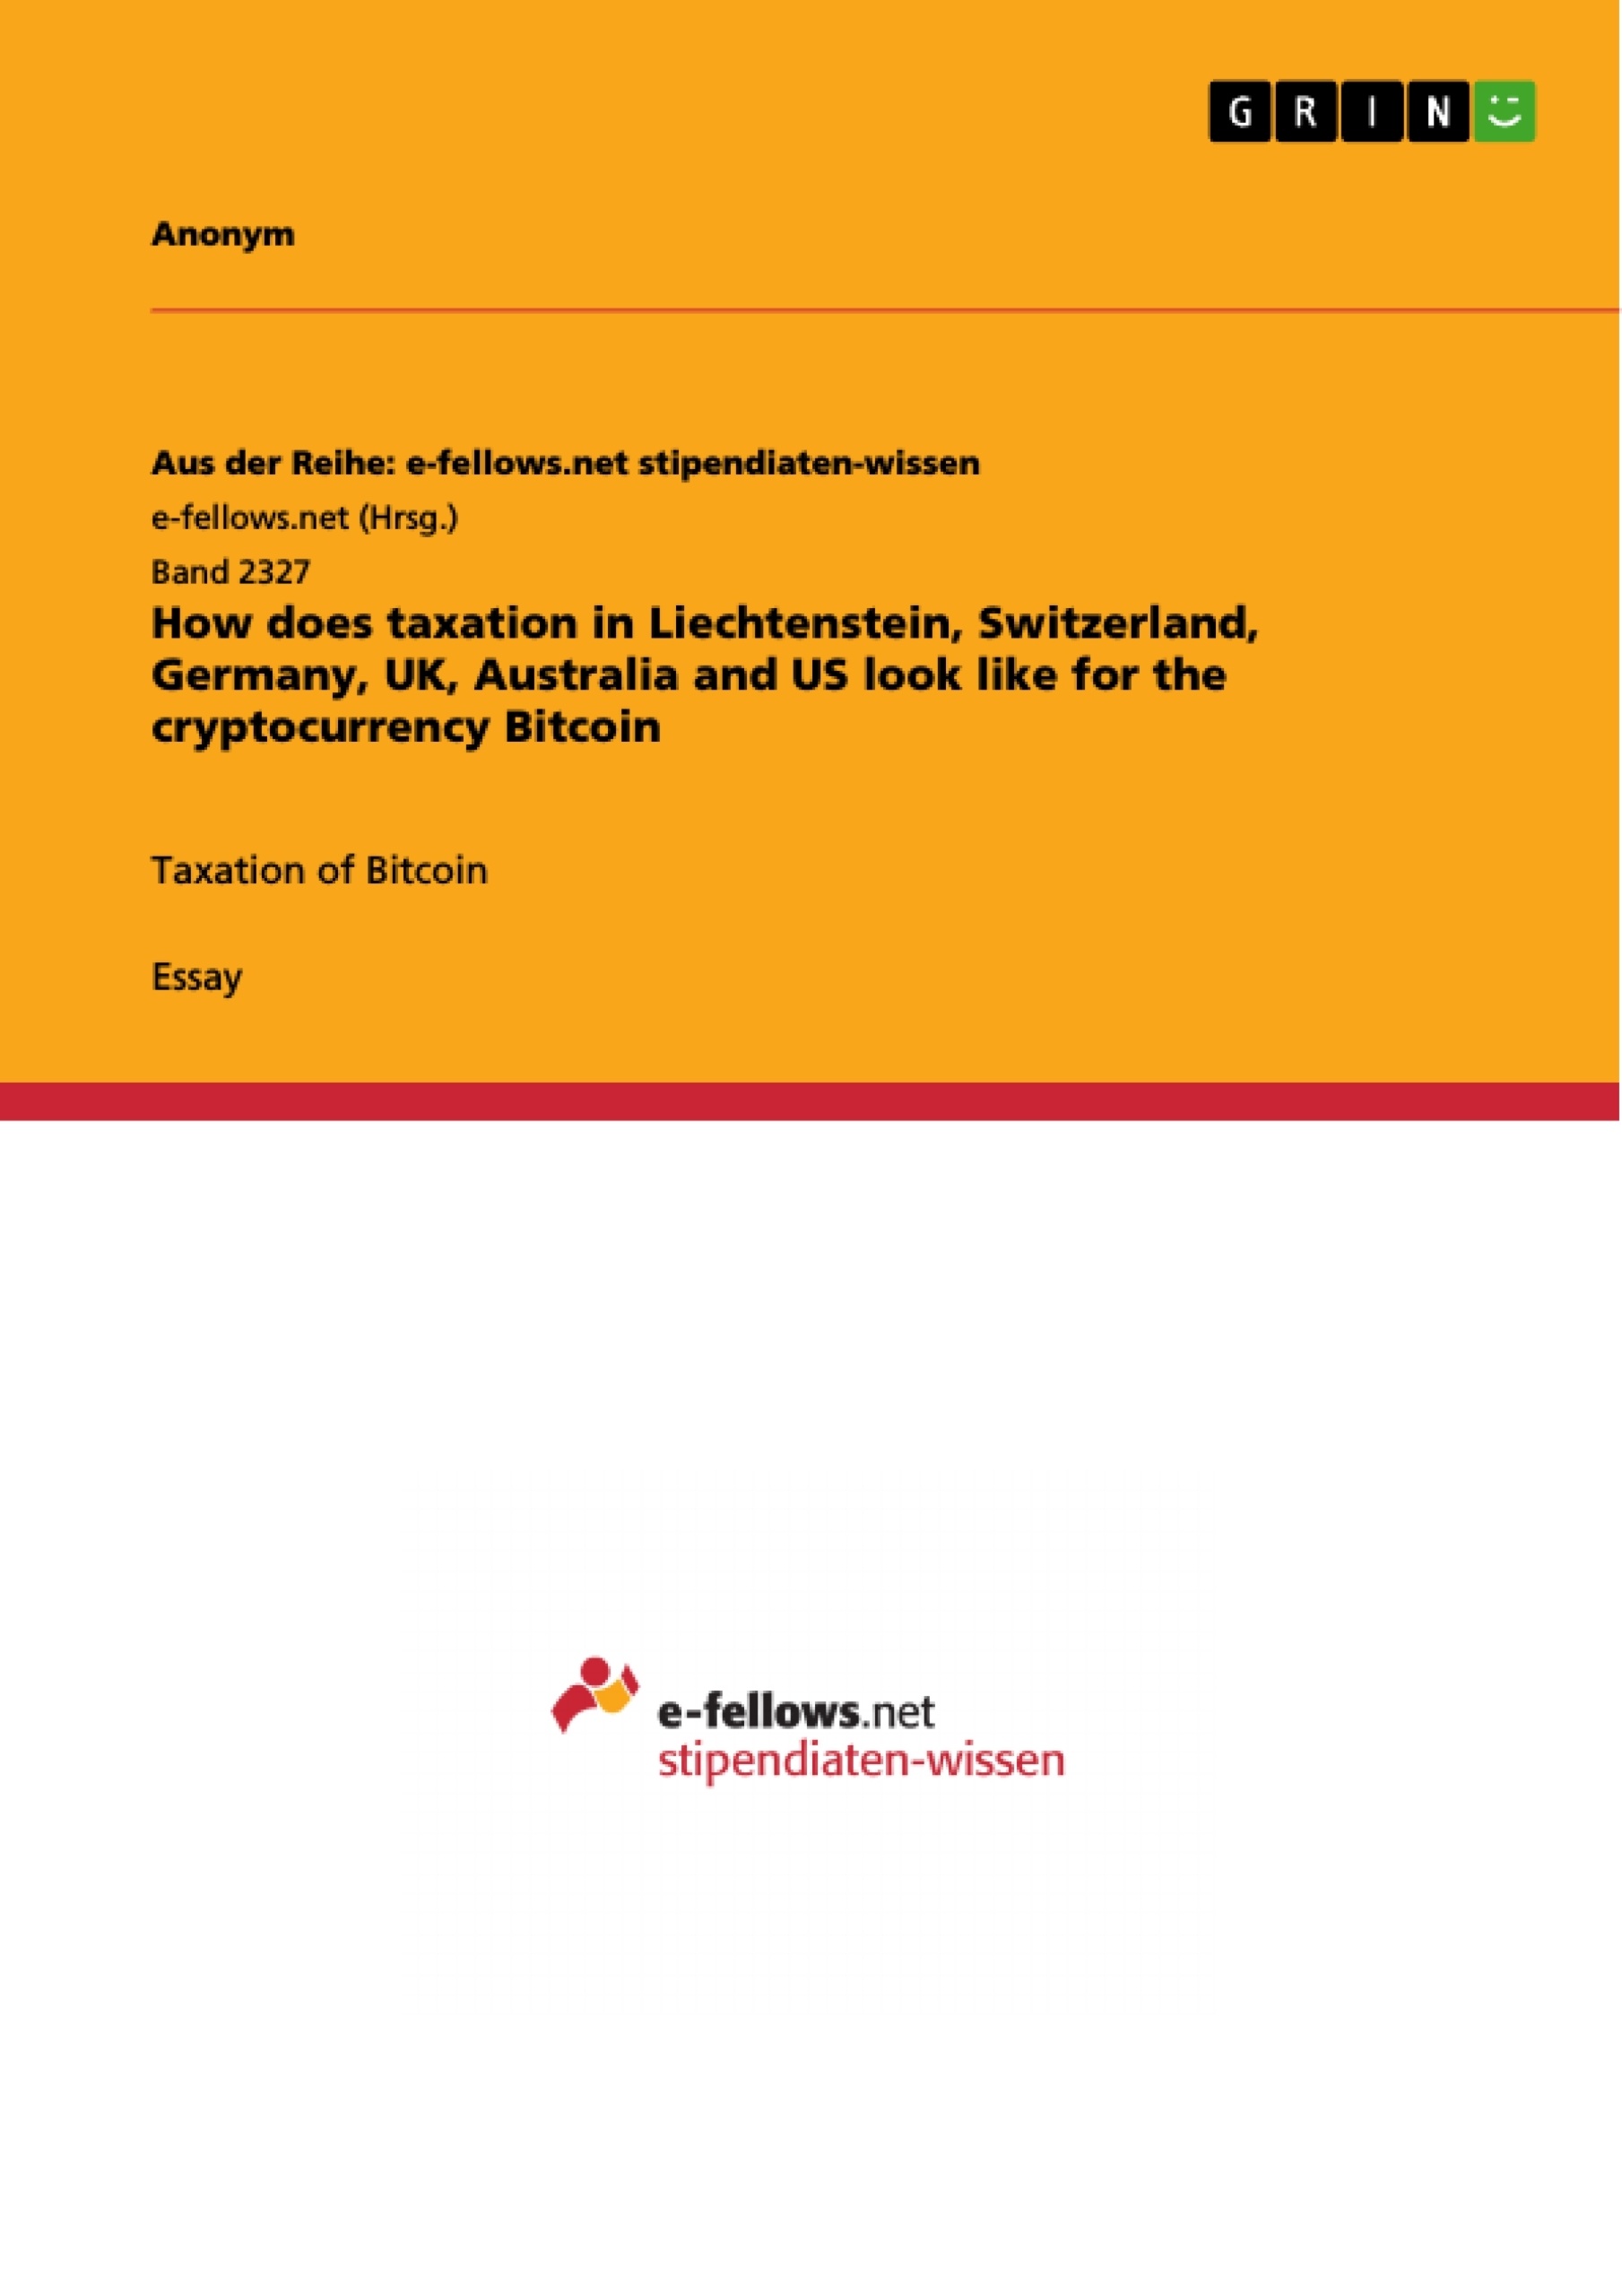 Titre: How does taxation in Liechtenstein, Switzerland, Germany, UK, Australia and US look like for the cryptocurrency Bitcoin